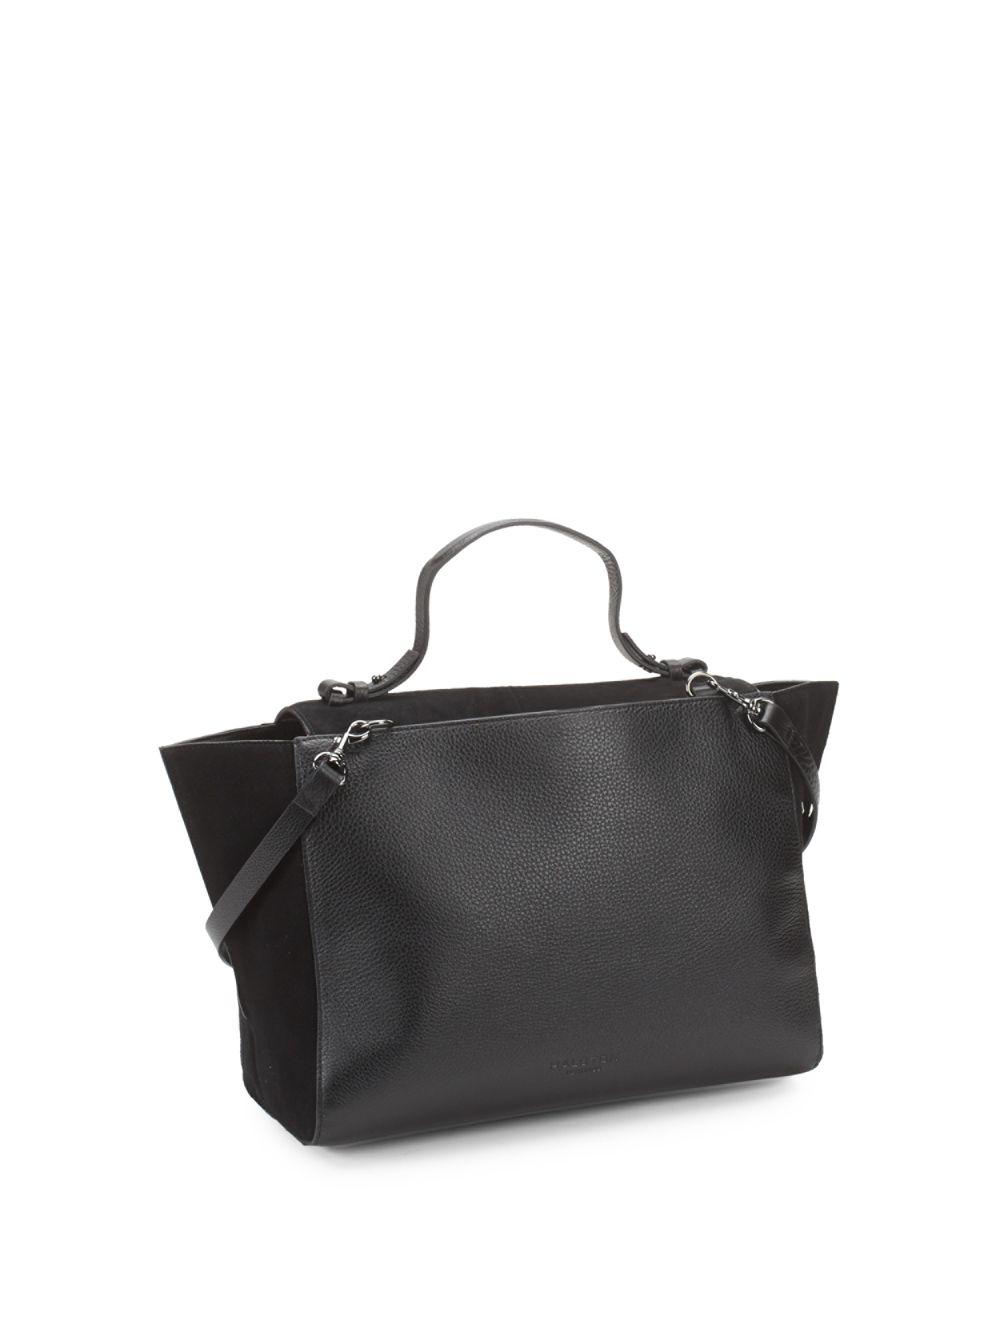 Halston Suede & Leather Tote Bag in Black - Lyst